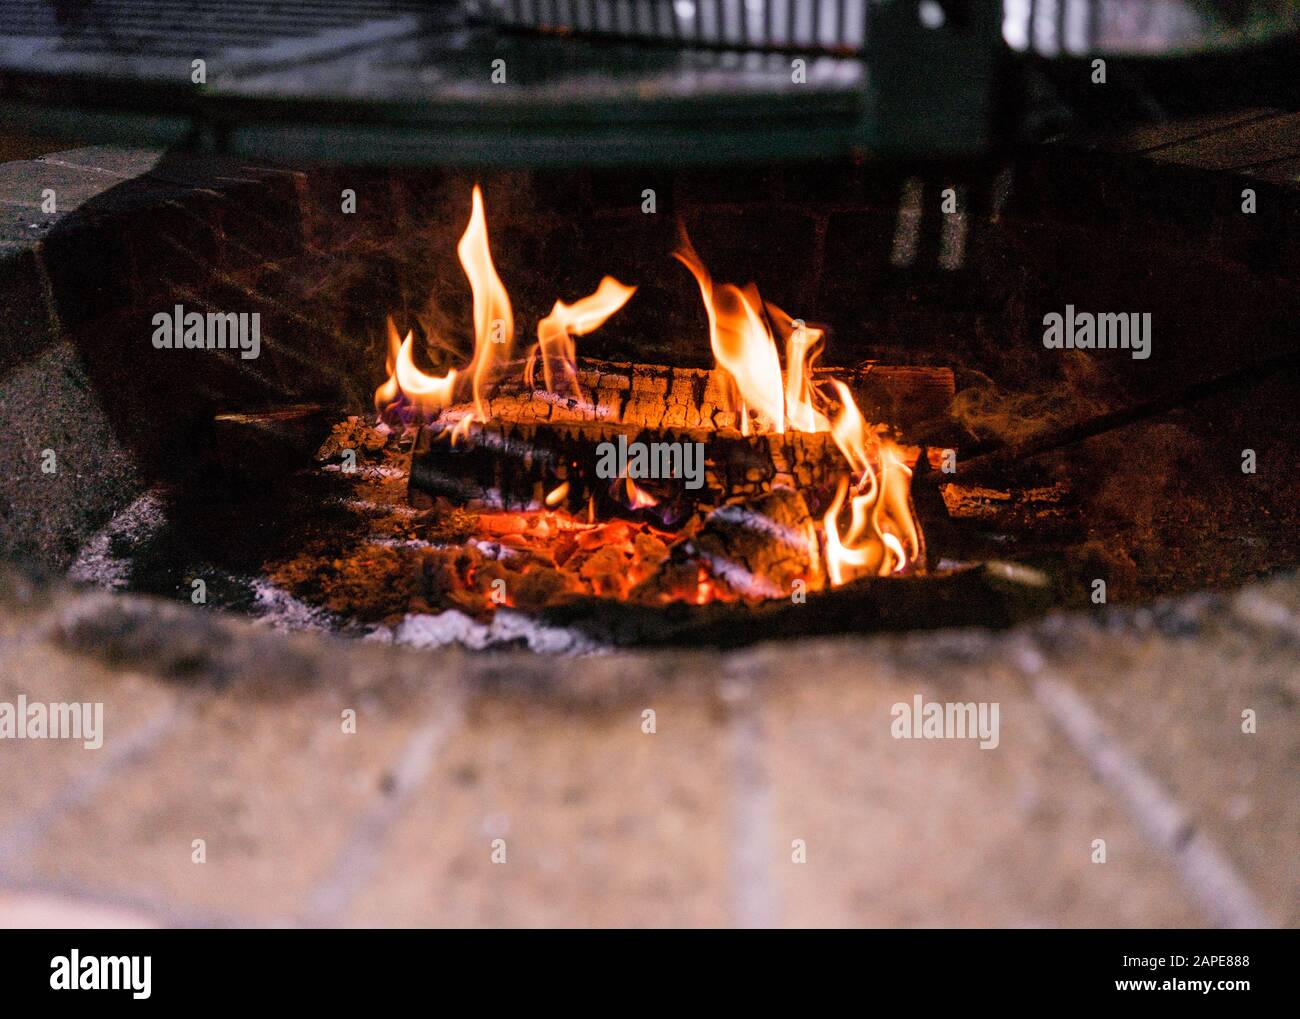 Close up shot of a fire in a brick fire pit Stock Photo